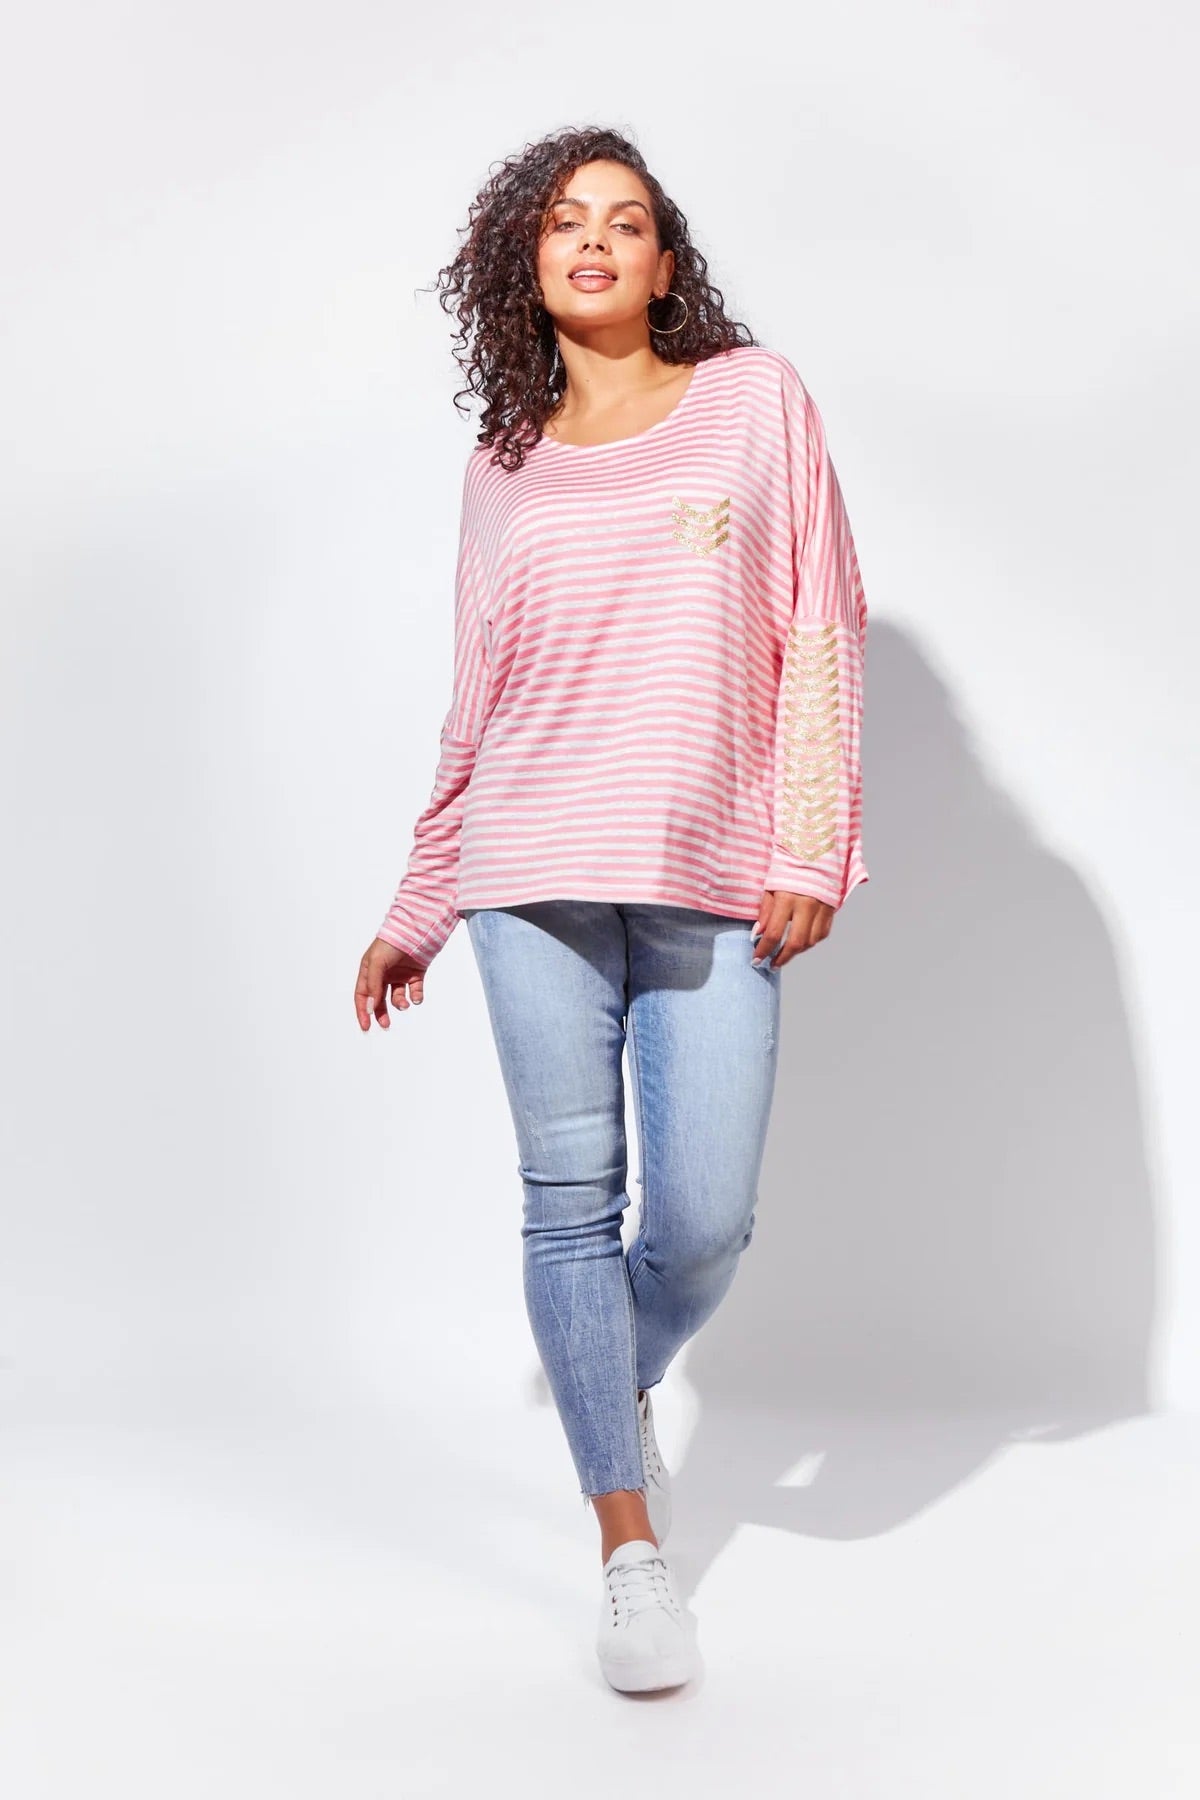 Haven Pila T-Shirt in Blossom Pink with Gold Detailing